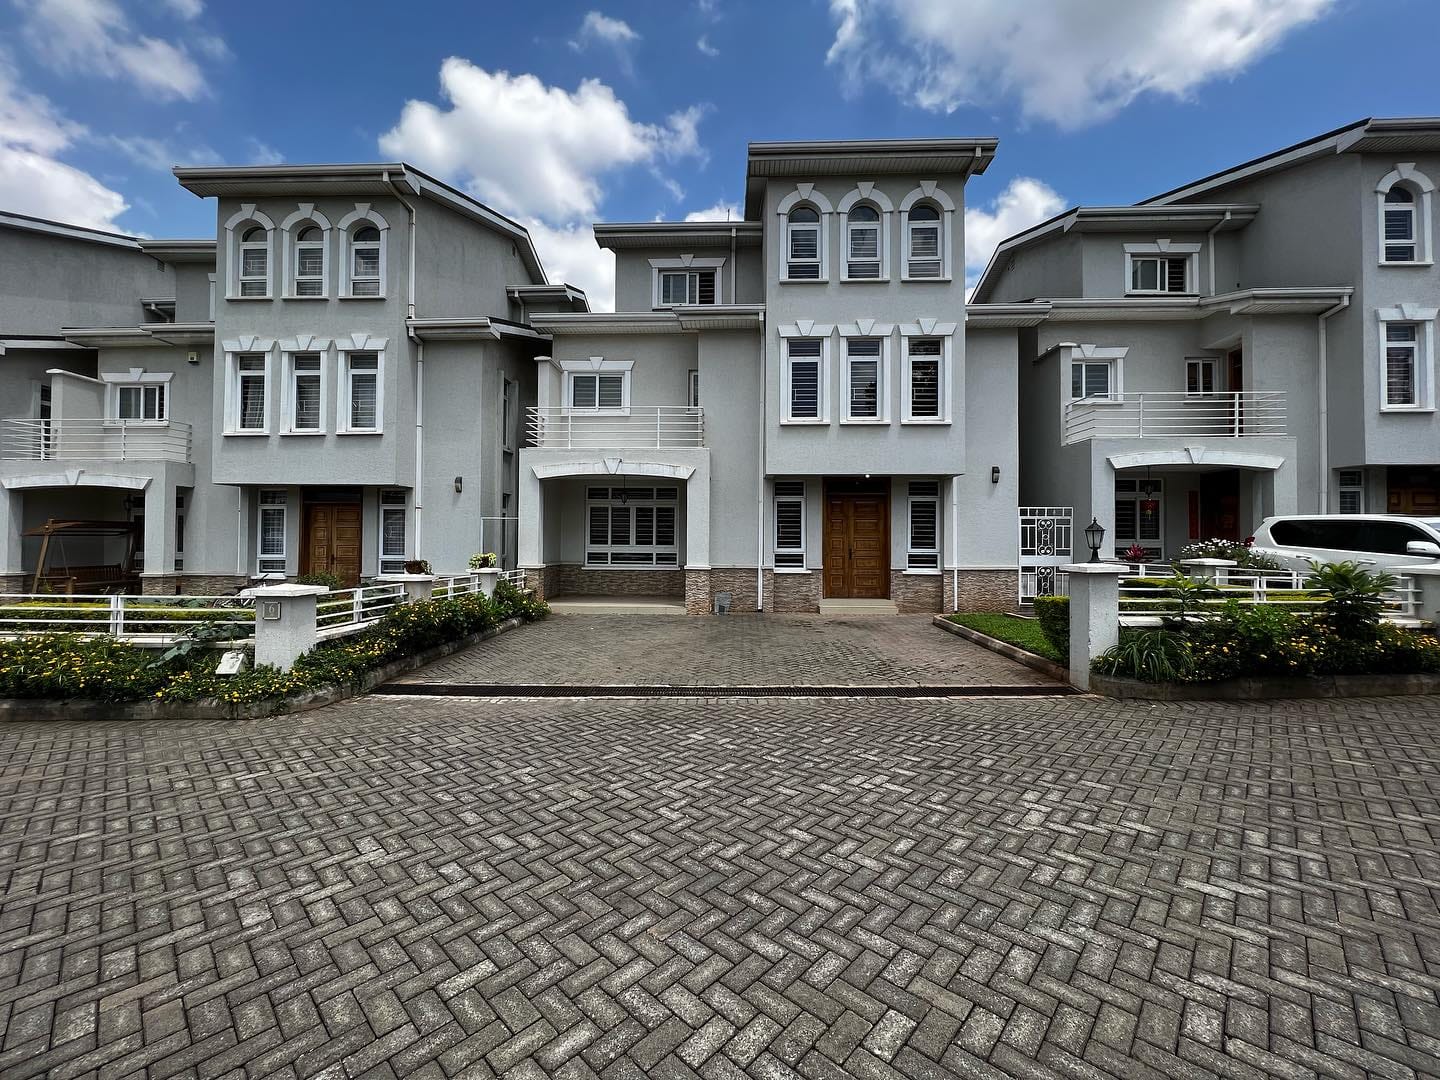 Modern 5 bedrooms with sq townhouse to let /sale in the leafy suburbs of Lavington near lavington mall. rent kshs 250,000 sale kshs 60 Million Musilli Homes